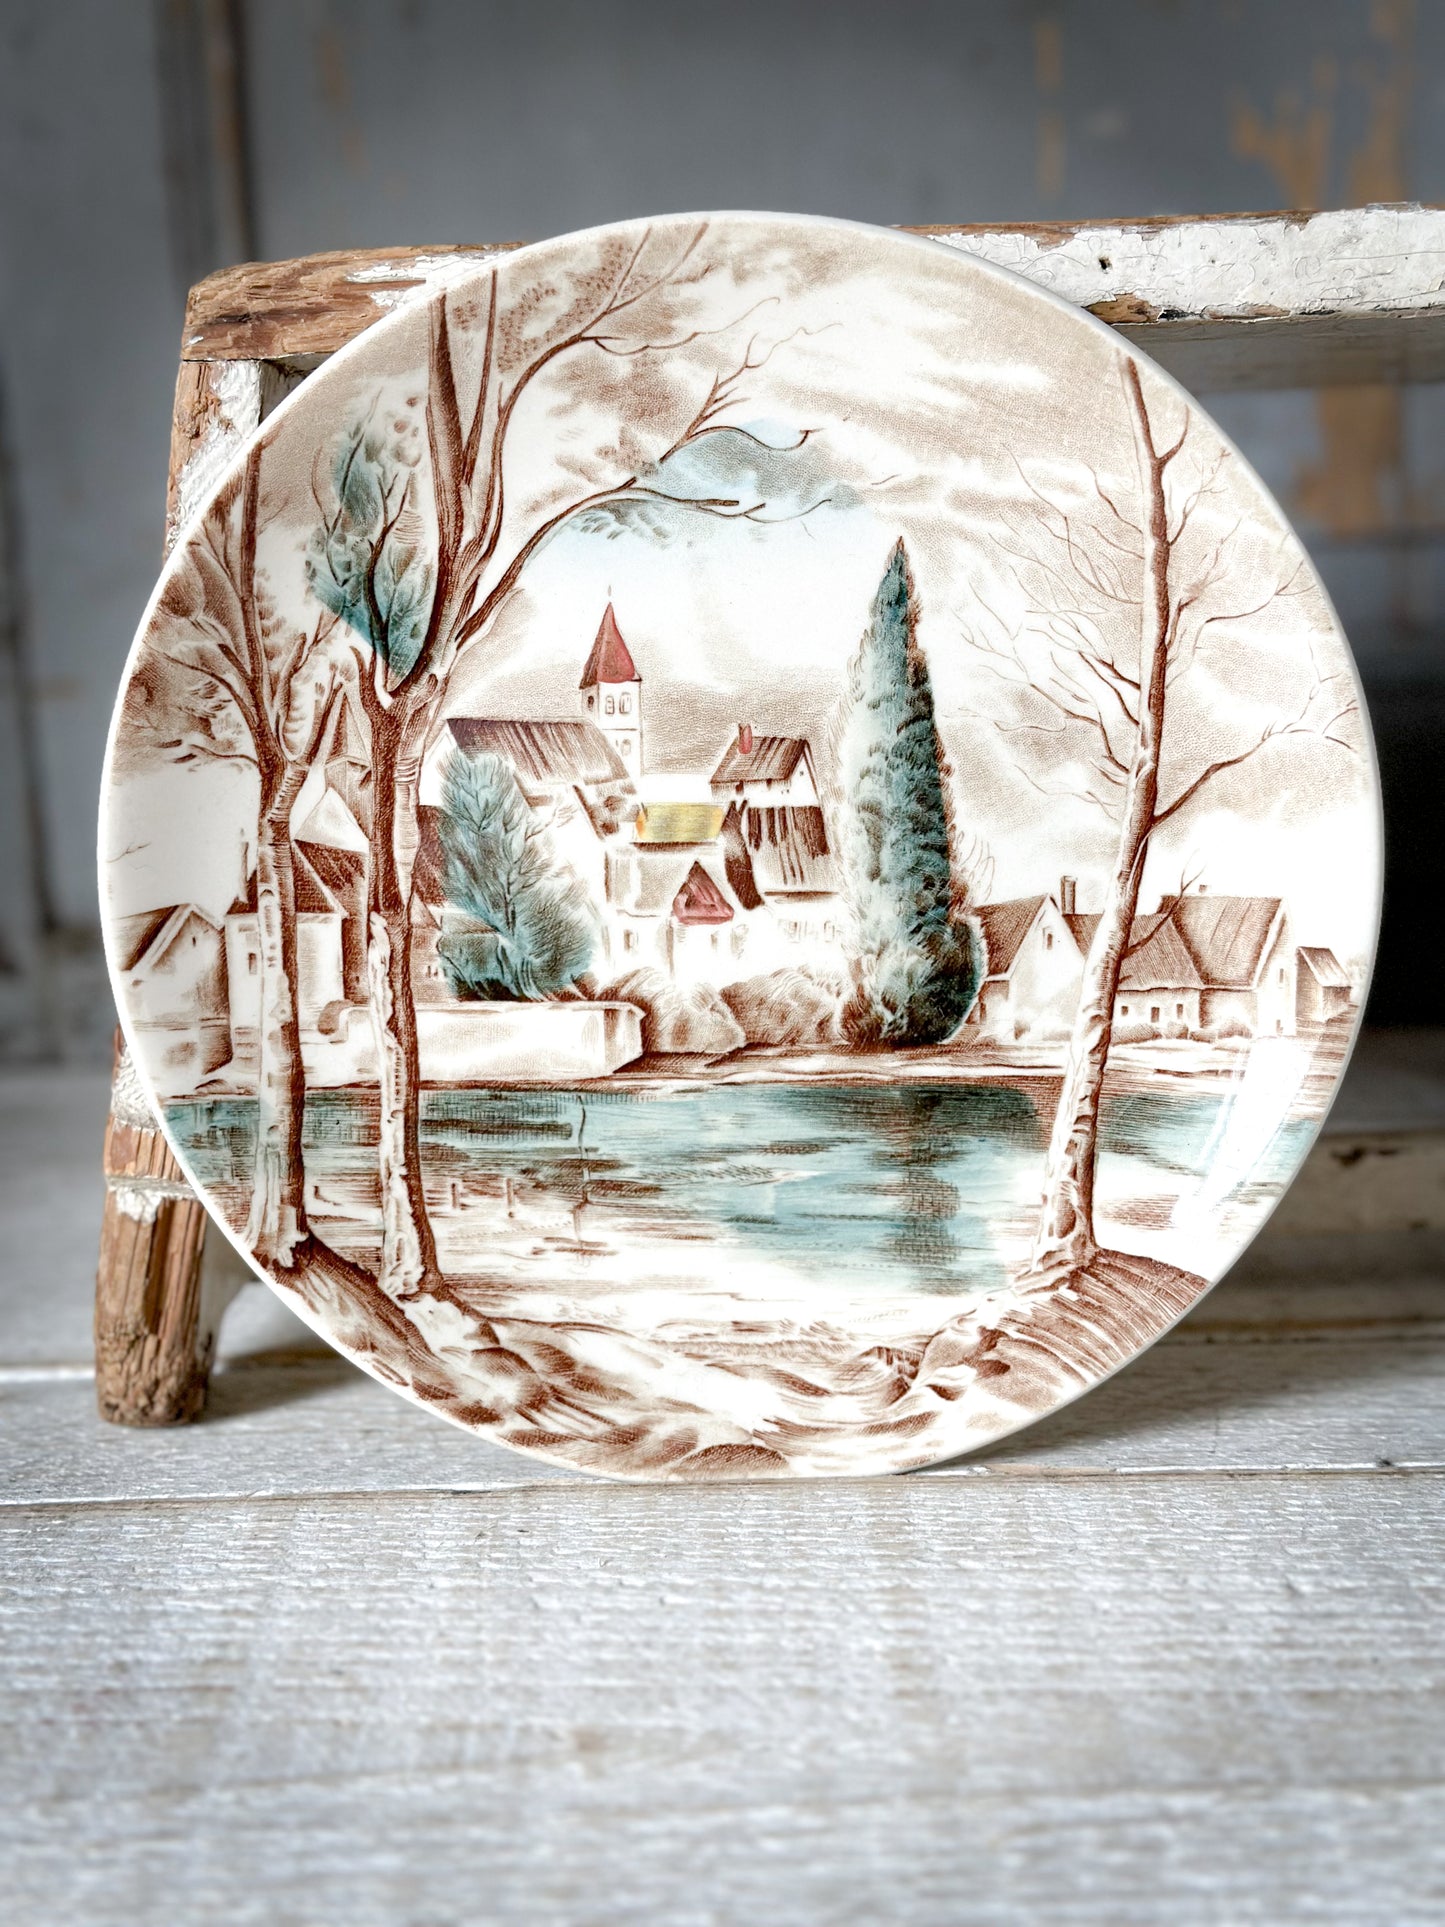 A lovely vintage plate “Dream Town” by Johnson Bros